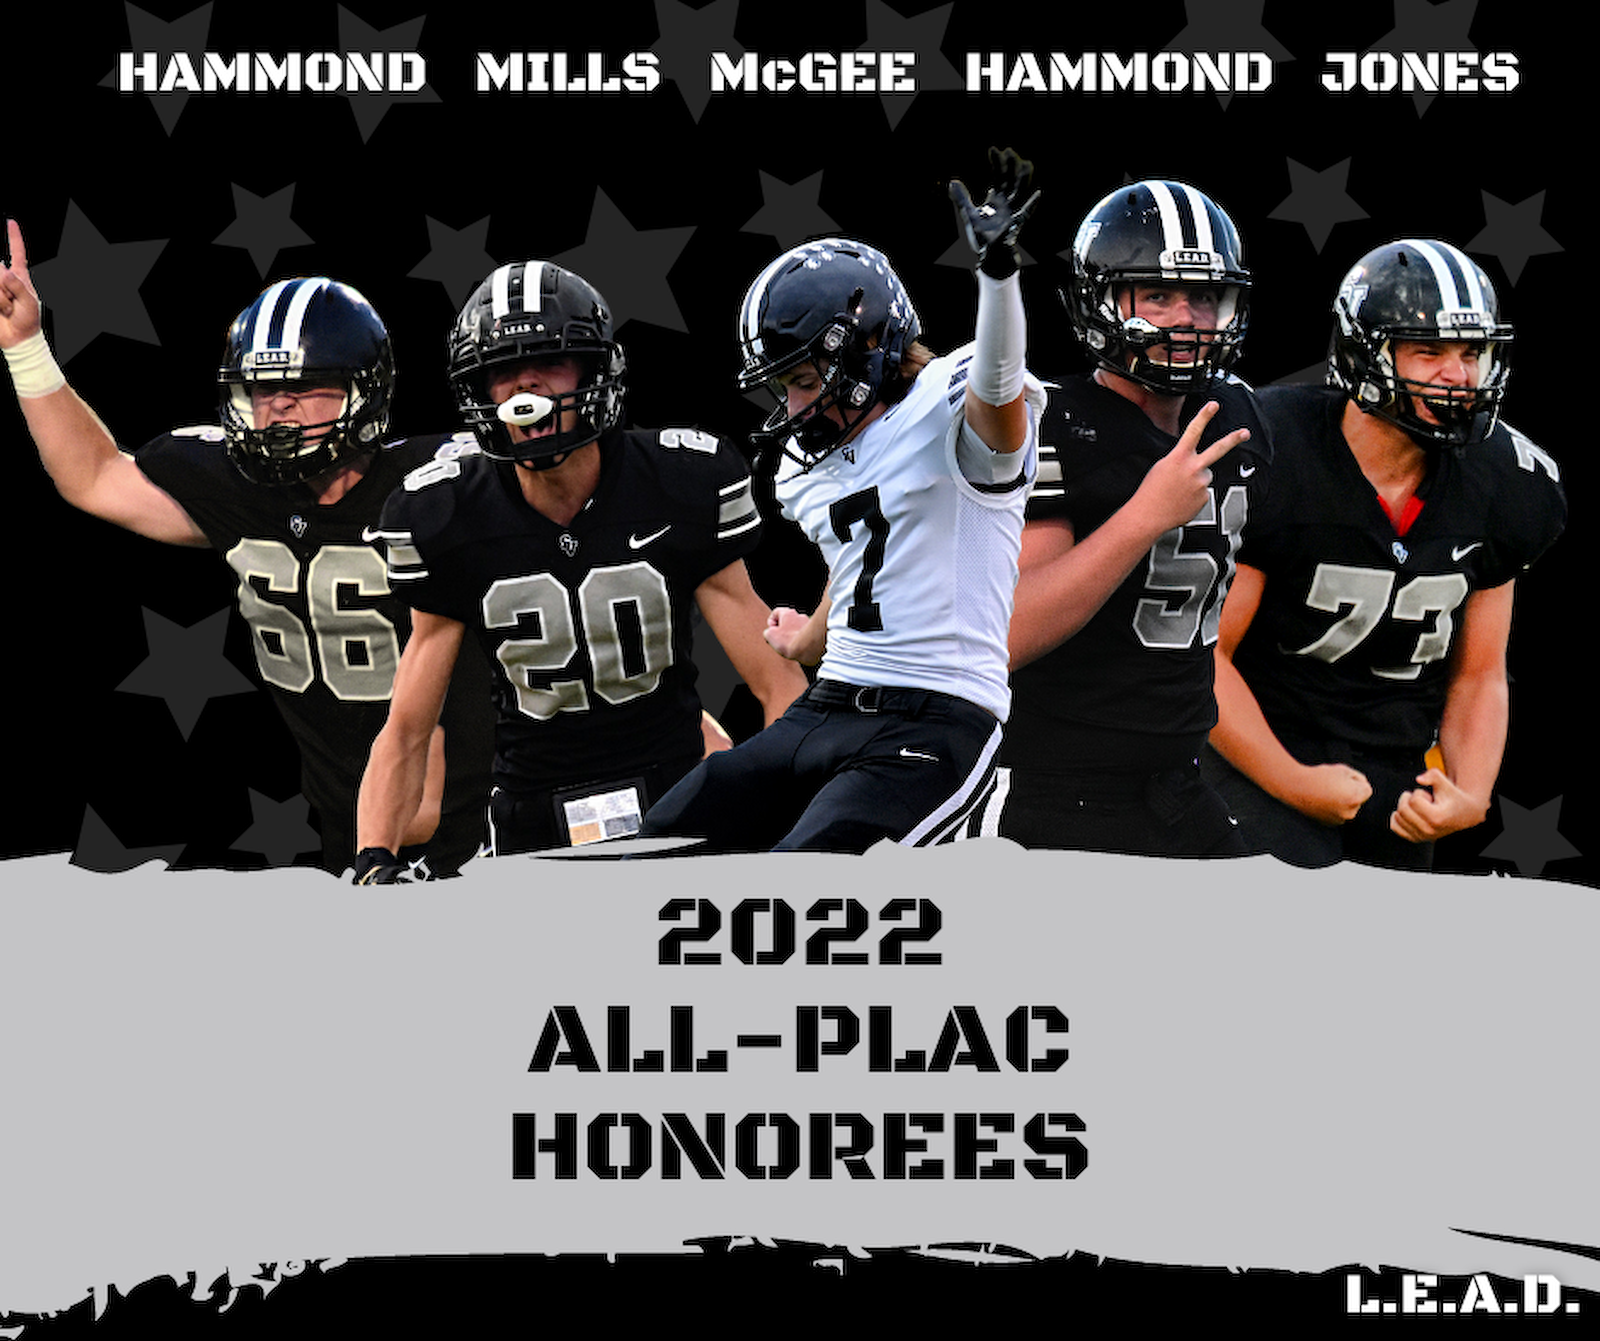 Five Blackhawks named to All-PLAC football team cover photo